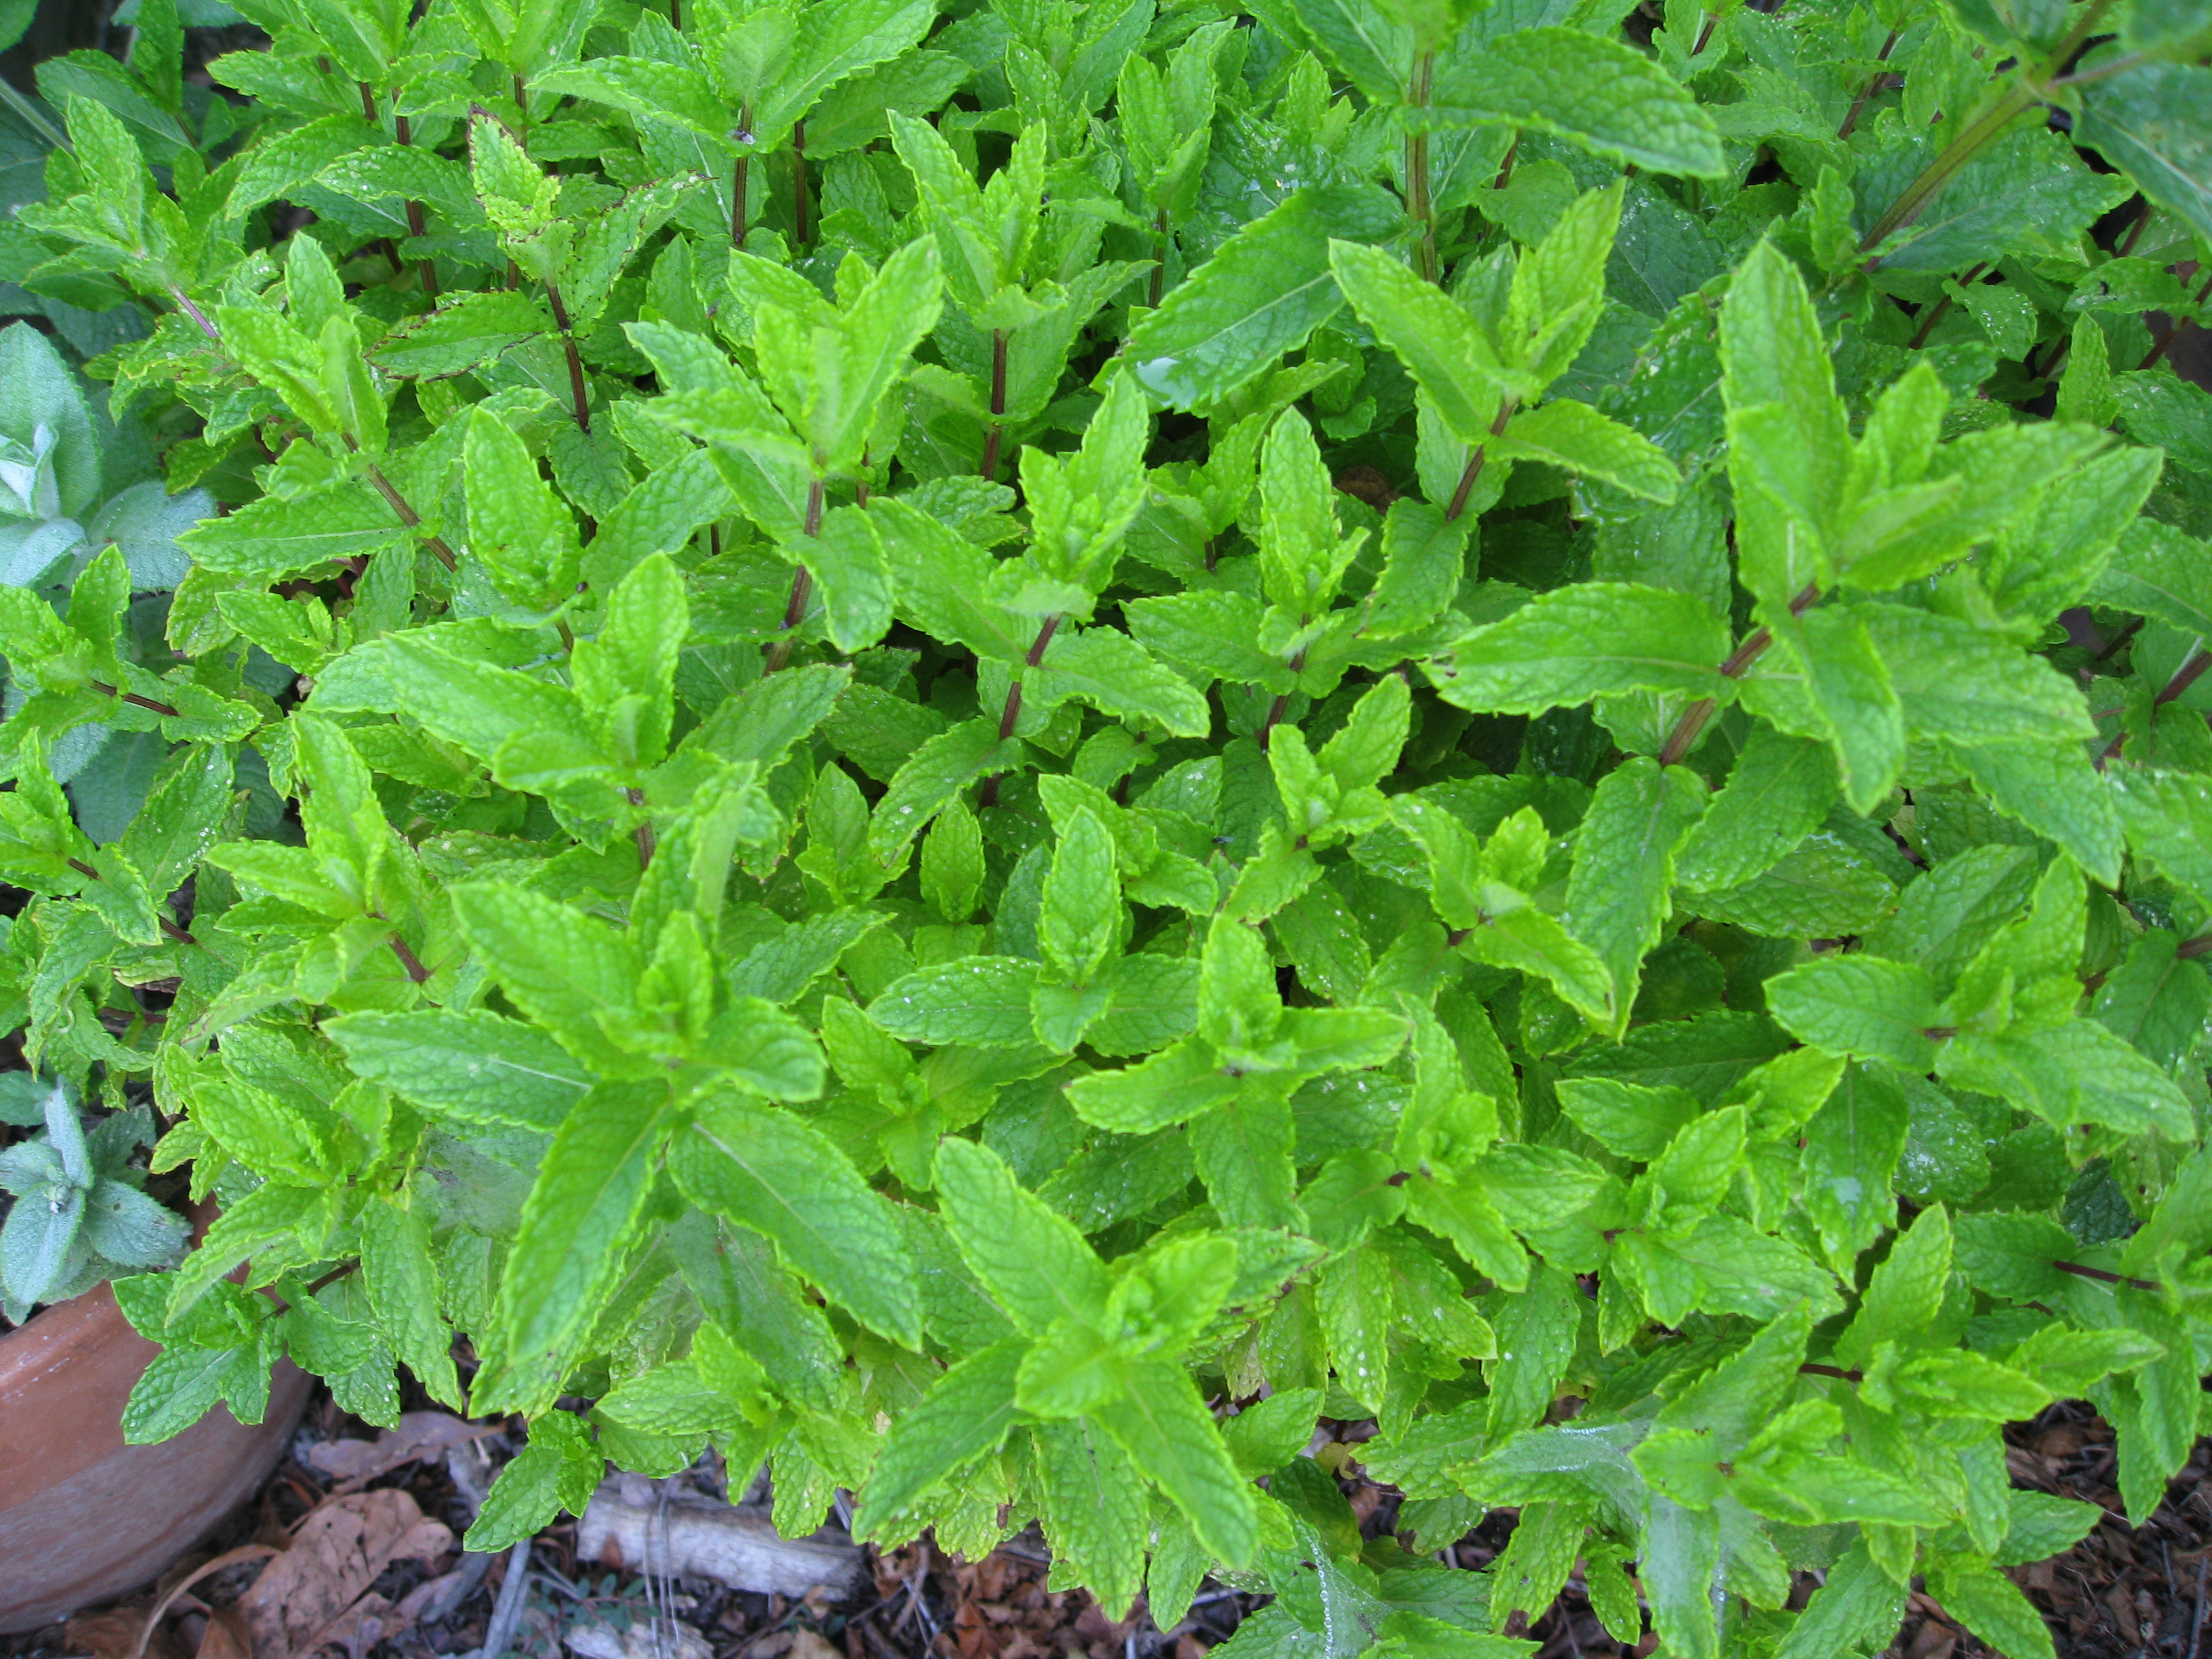 Mint is ready for use, as are many other herbs.